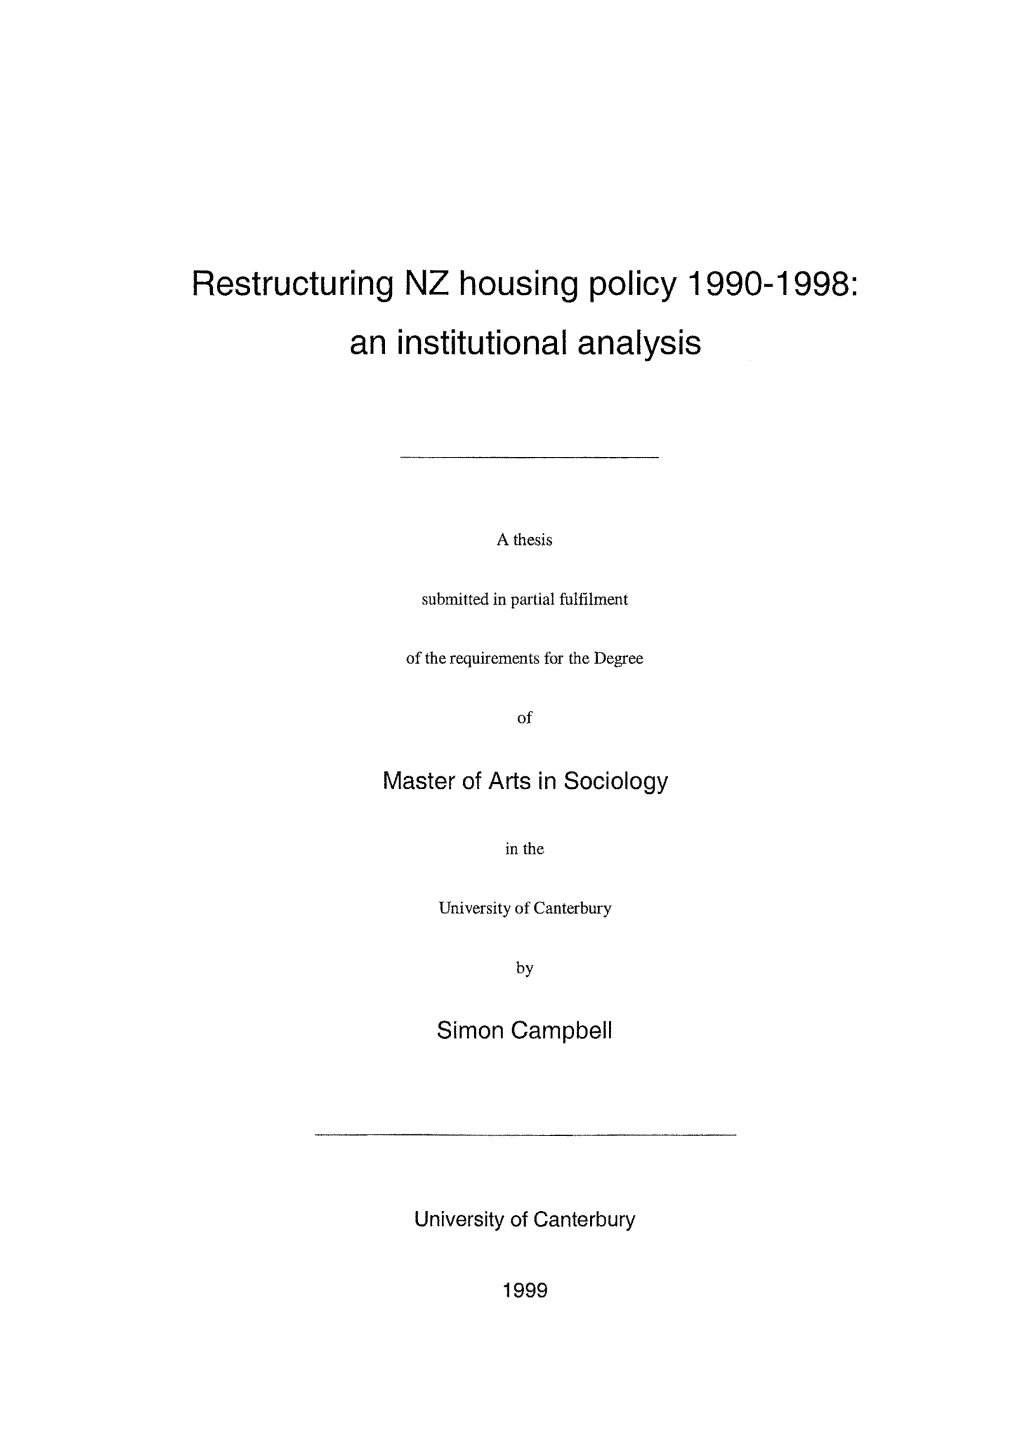 Restructuring NZ Housing Policy, 1990-1998